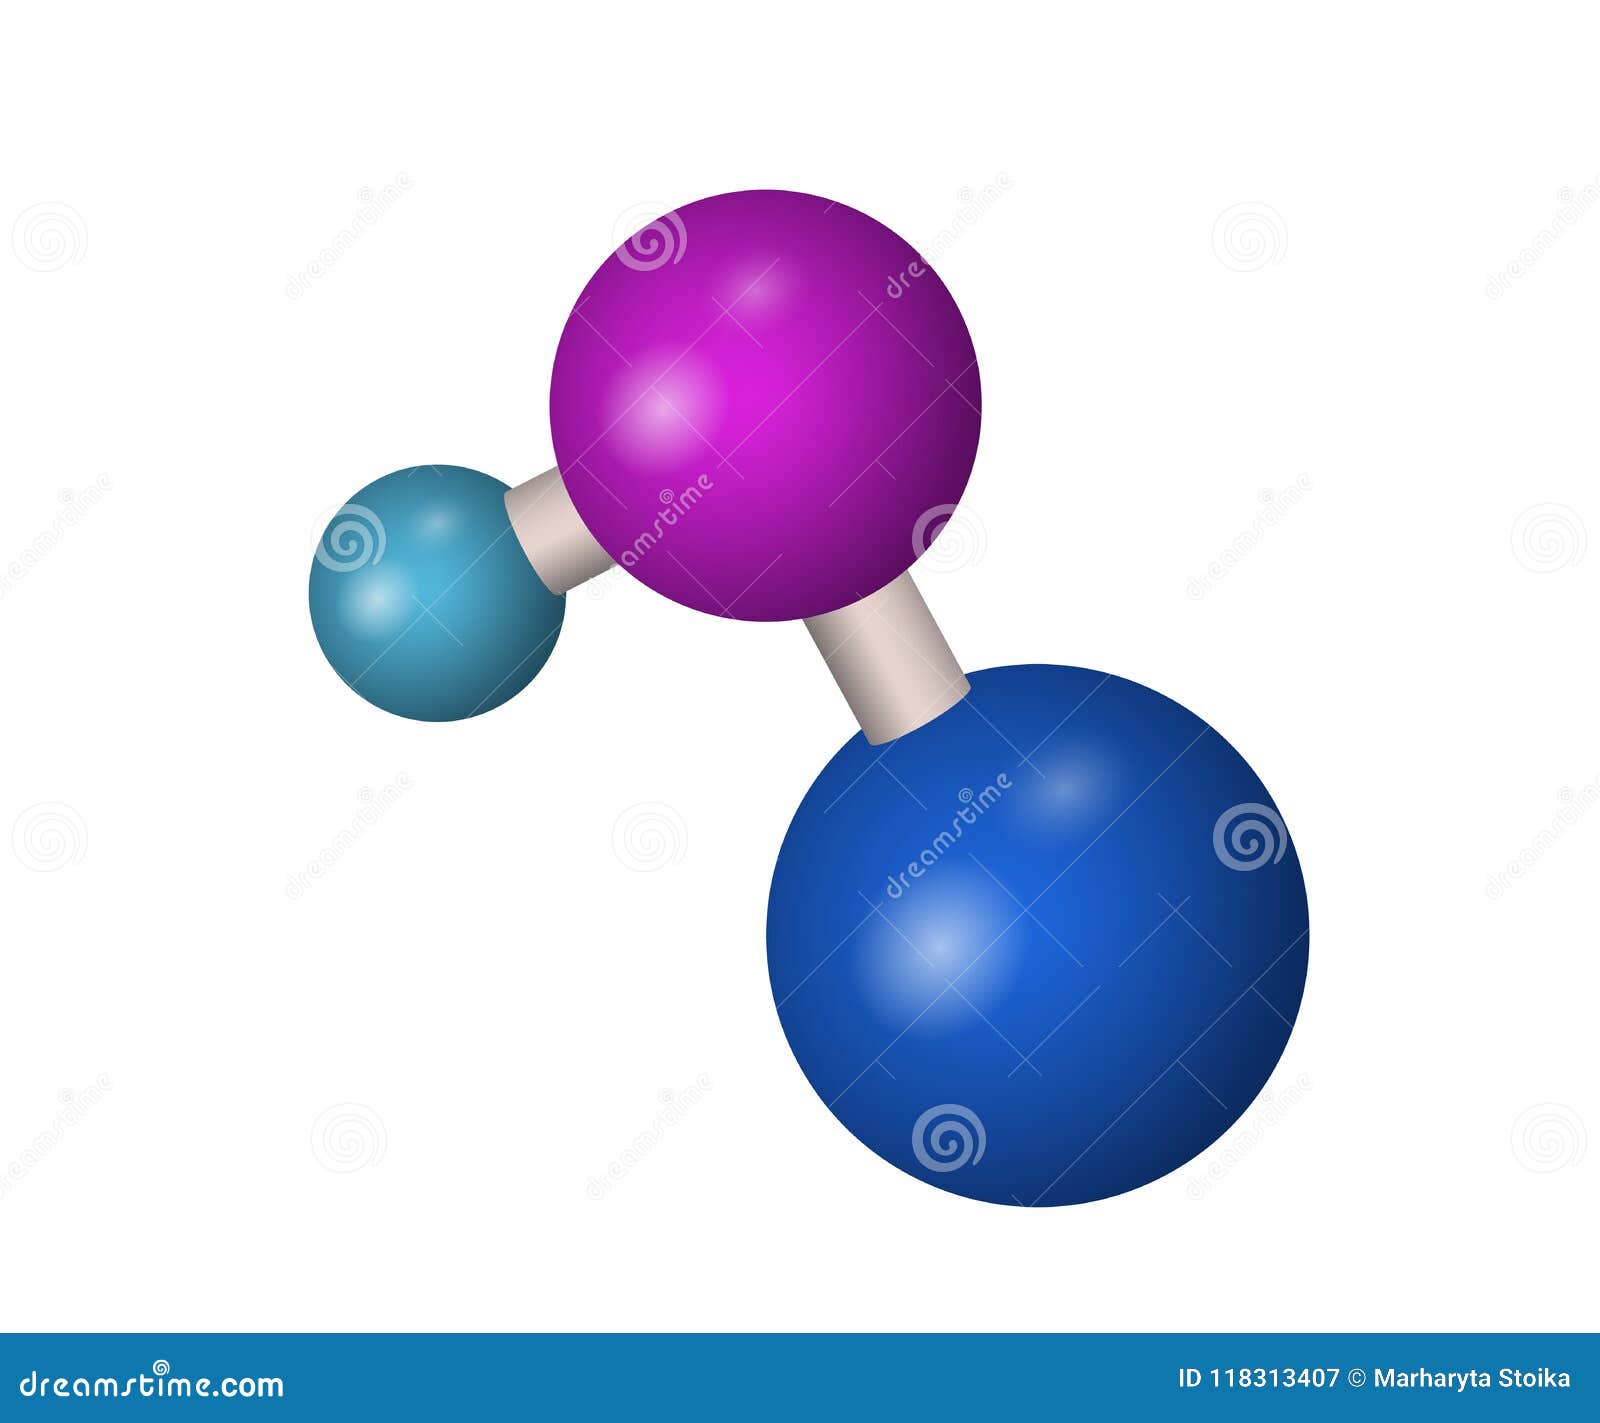 Vector Ballandstick Model Of Sodium Hydroxide Molecule Naoh Or Lye Common  Base A Structural Formula Consisting Of Sodium Oxygen And Hydrogen Stock  Illustration - Download Image Now - iStock